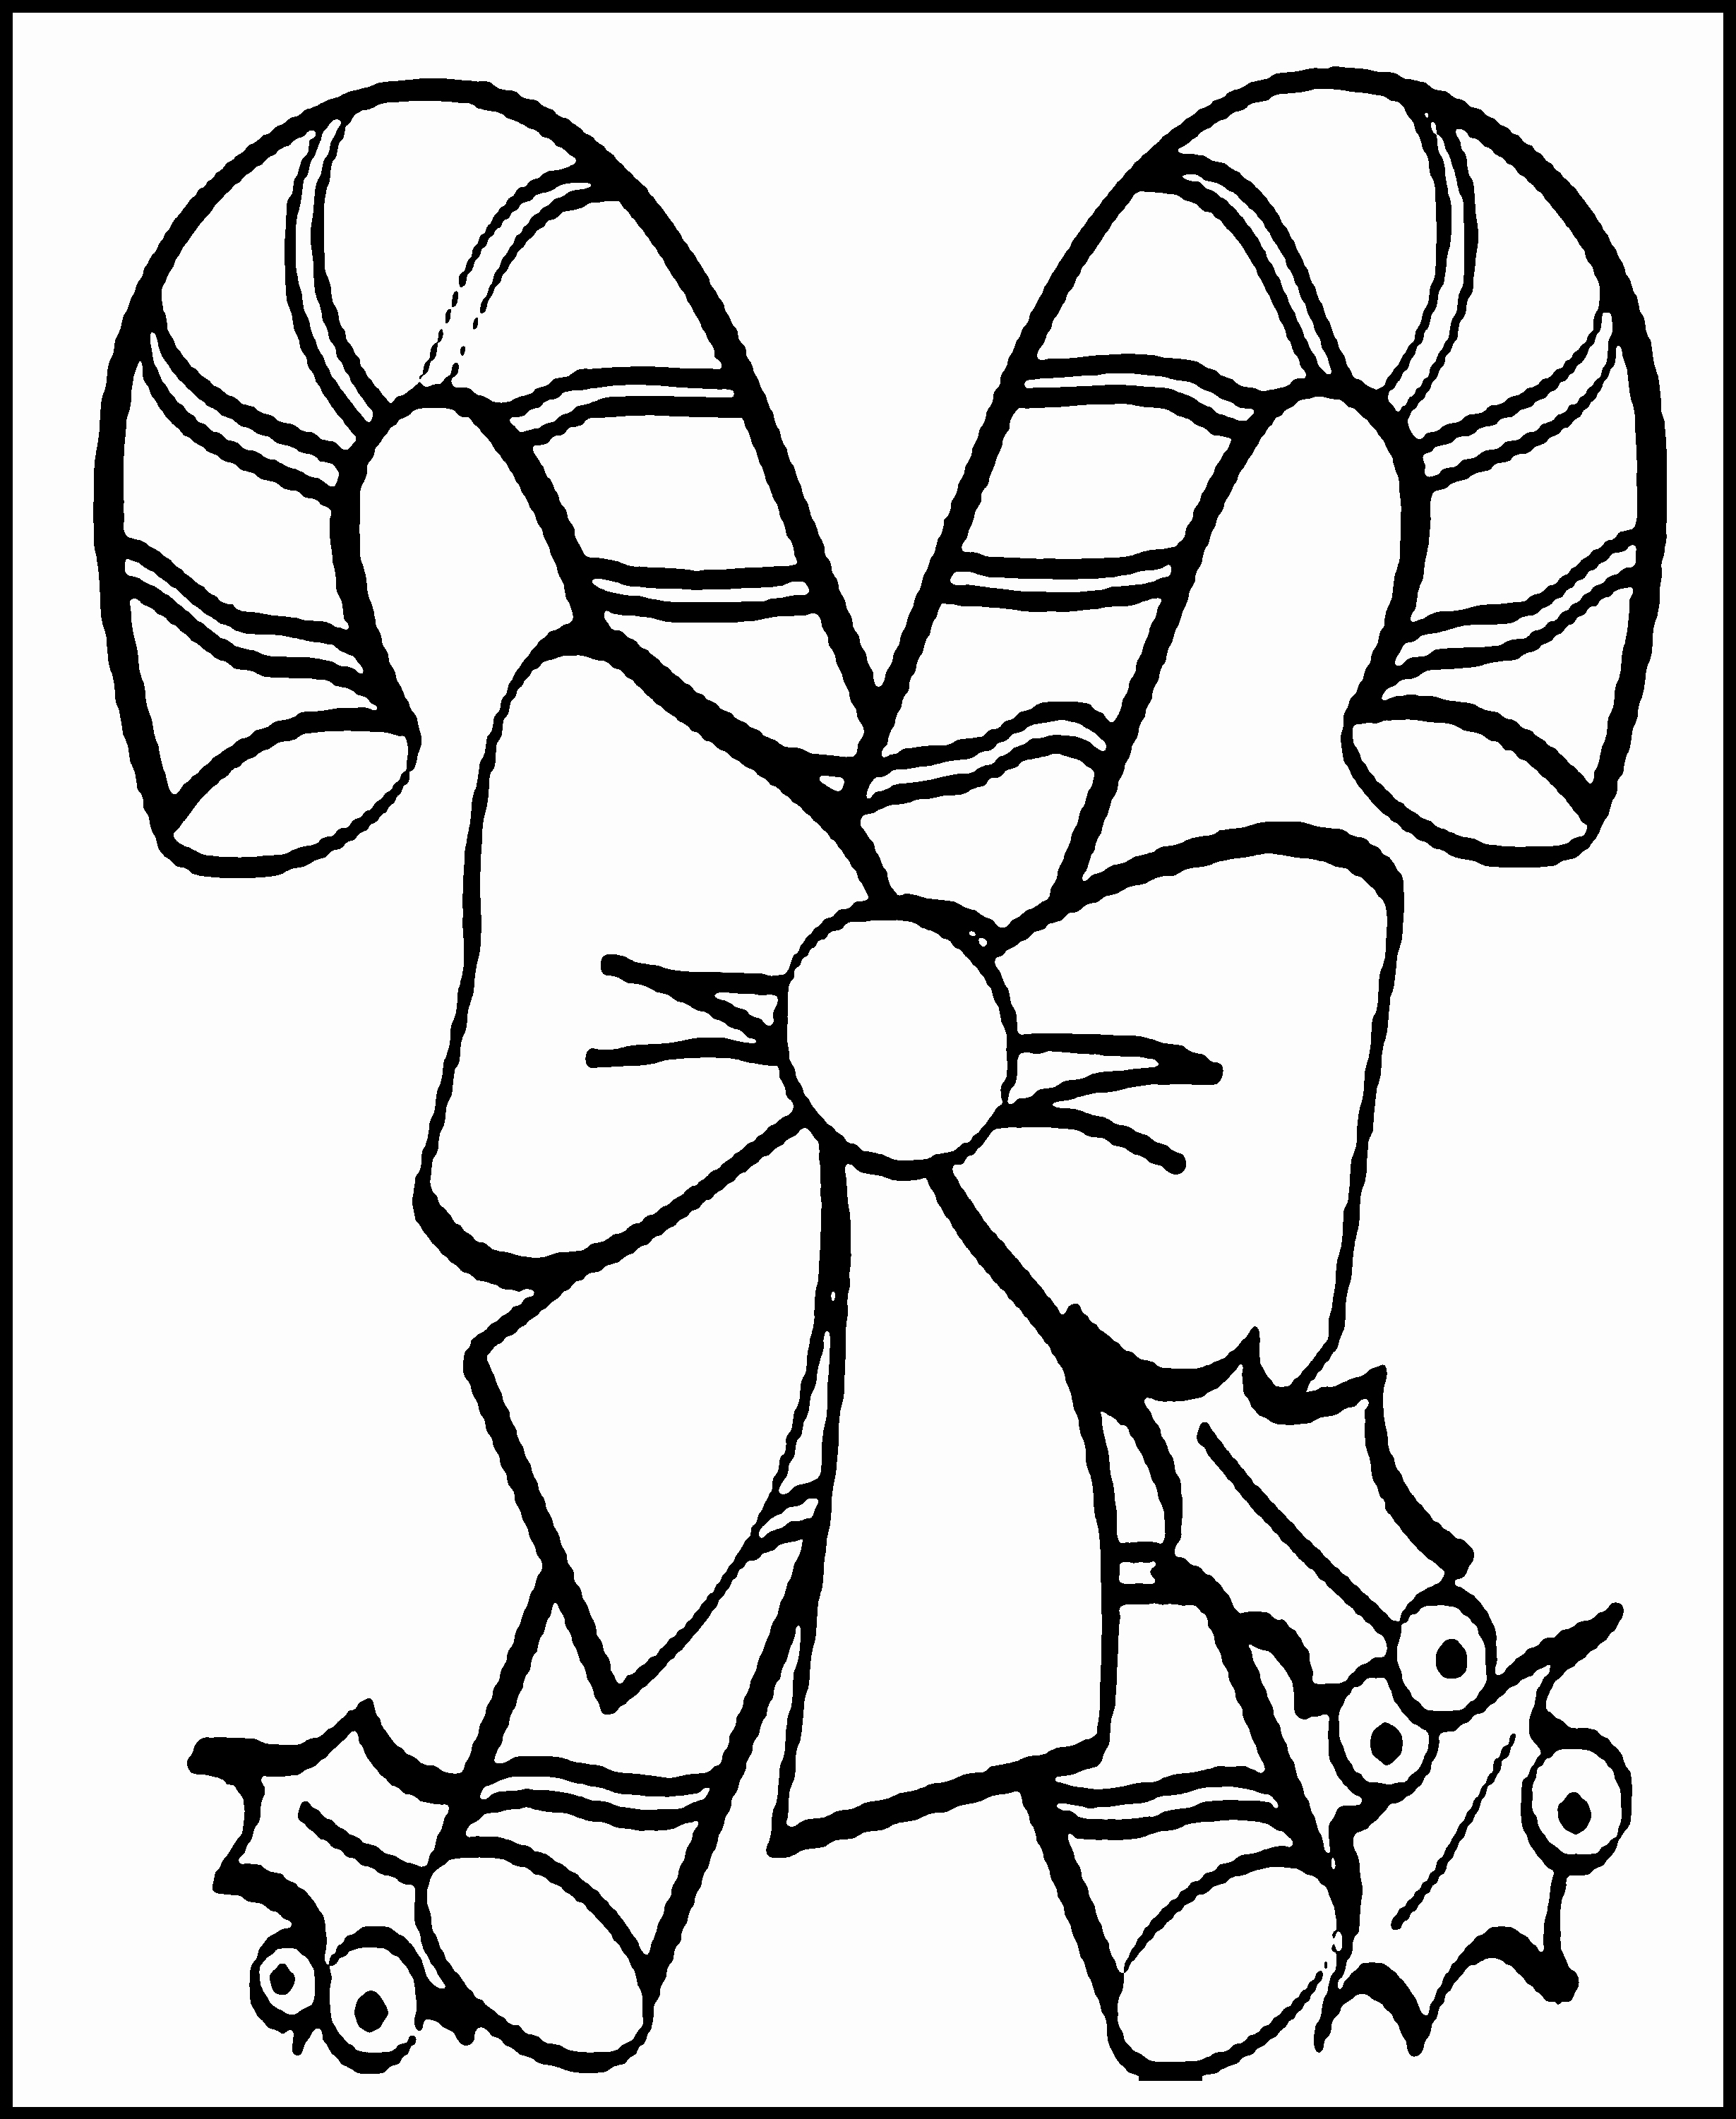 peppermint-candy-coloring-pages-at-getcolorings-free-printable-colorings-pages-to-print